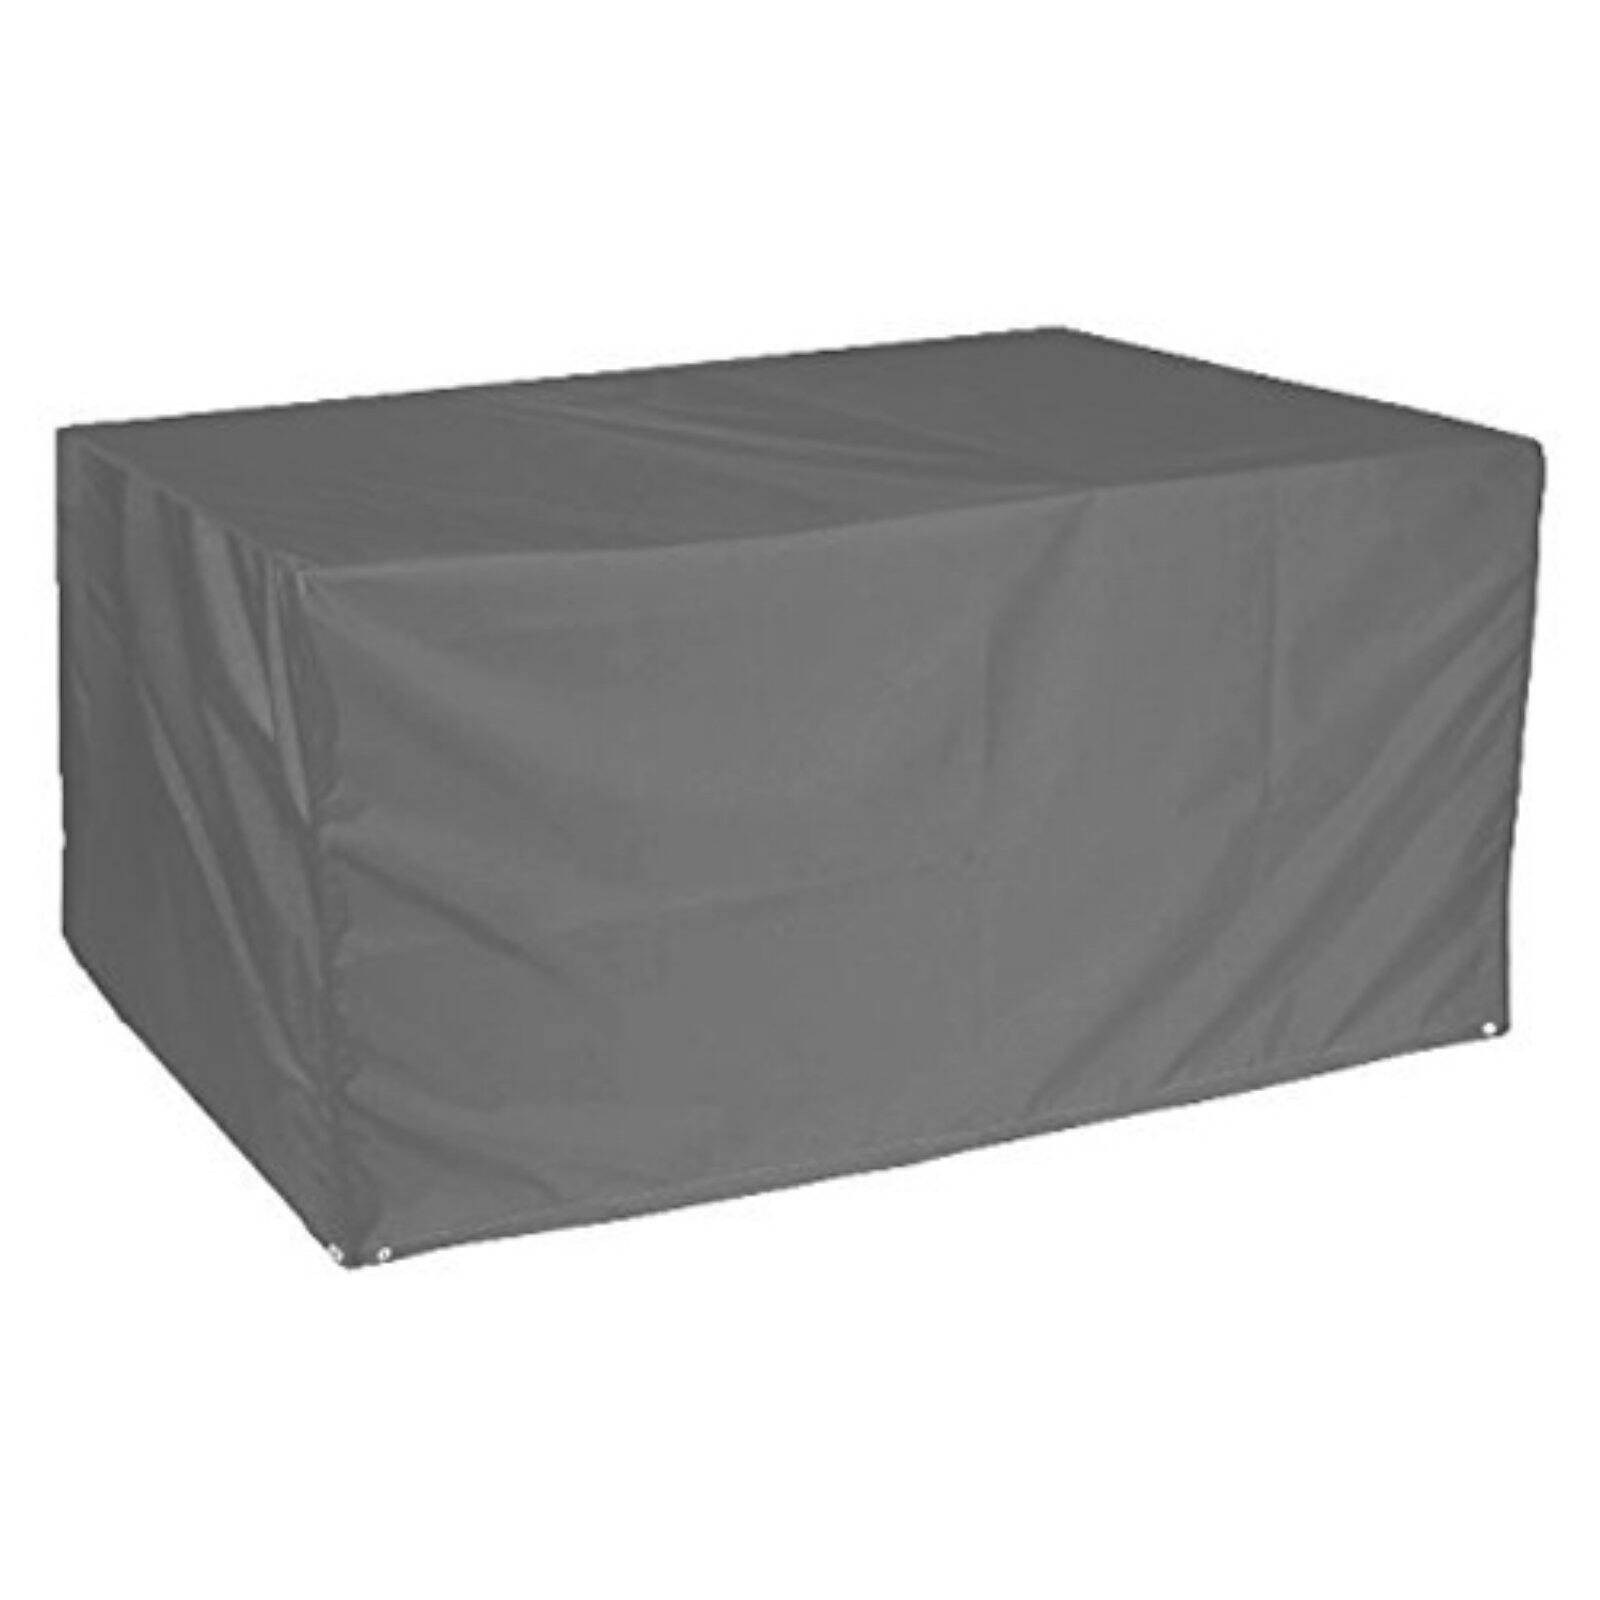 Bosmere Waterproof Grey Cover for 67 in. Rectangular Table - 67L x 37W x 28H in. - image 1 of 4